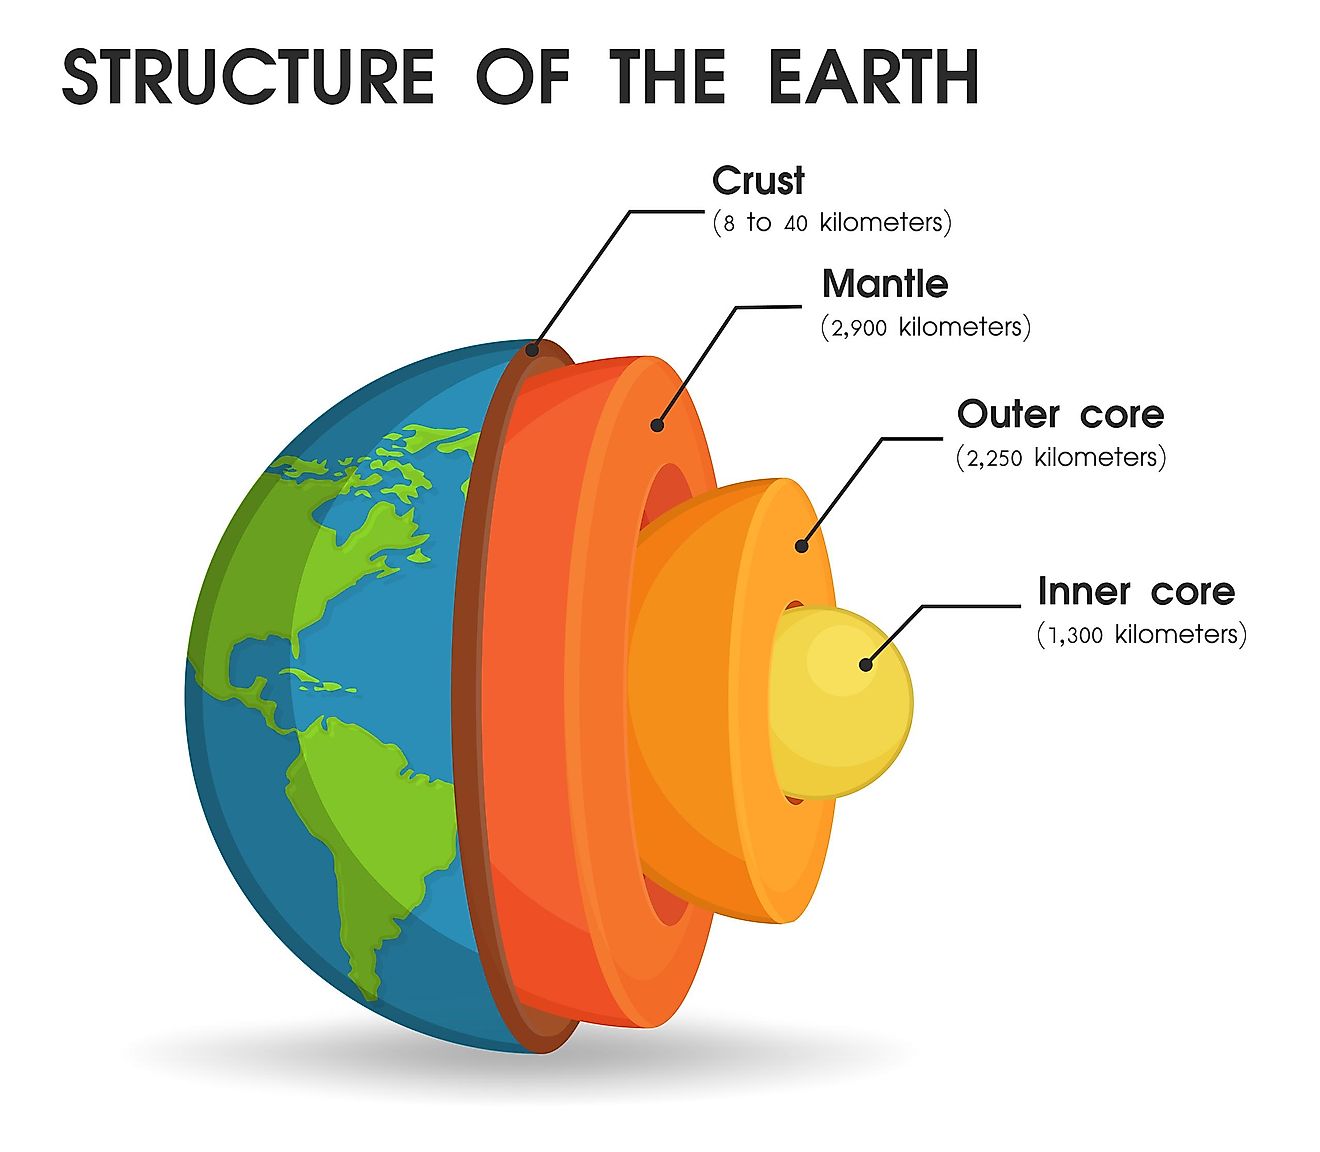 The Earth’s mantle is the thickest of the three zones of our planet. It surrounds the core and it is mostly made up of solid rock.